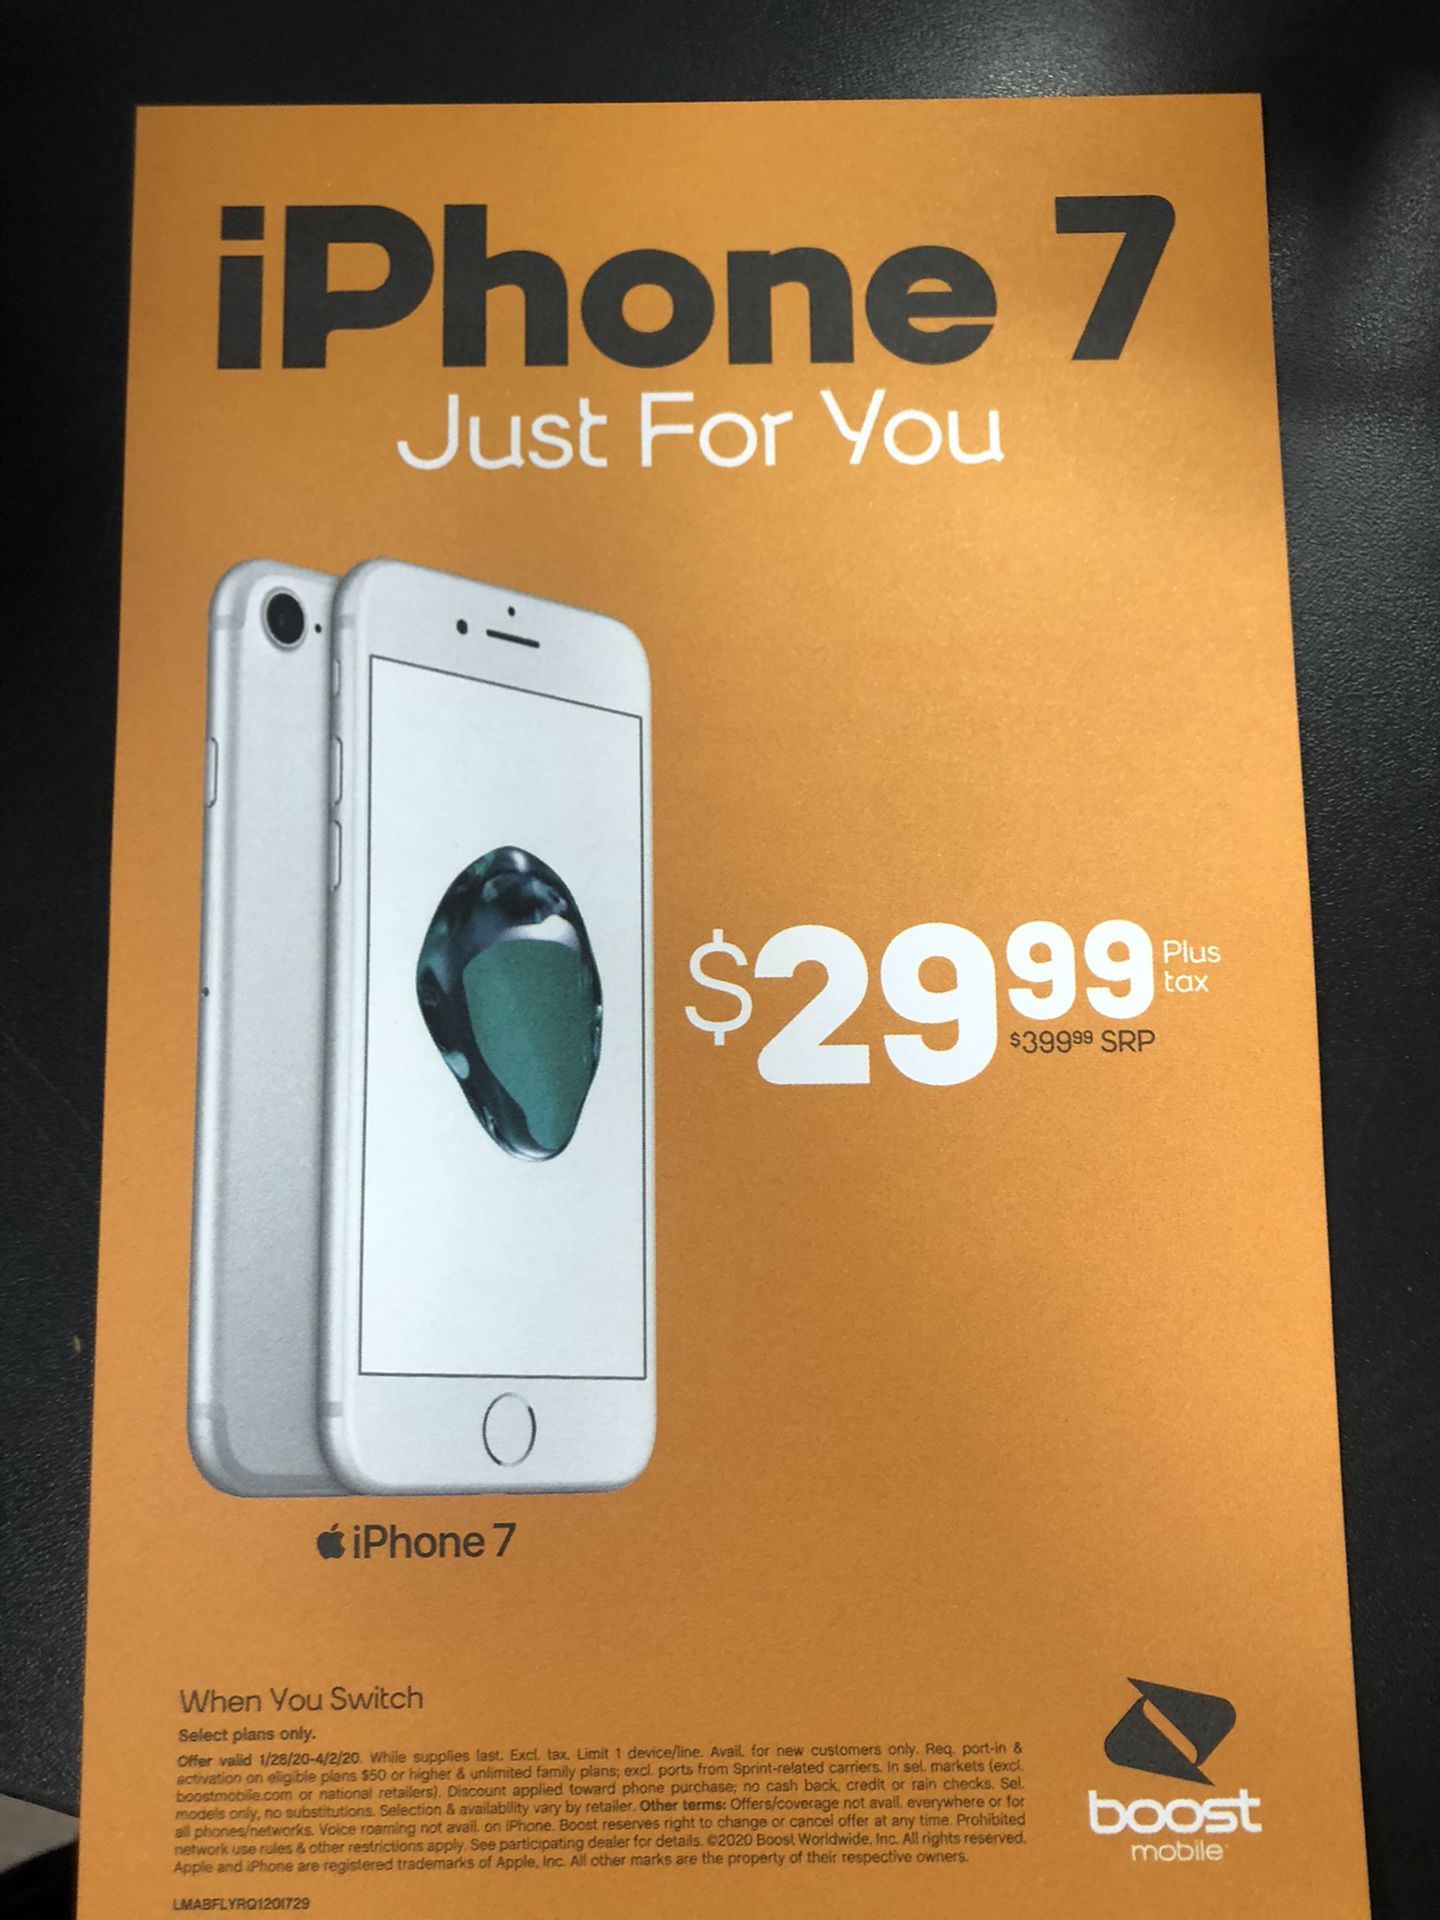 iPhone 7 $29.99 when you switch to boost